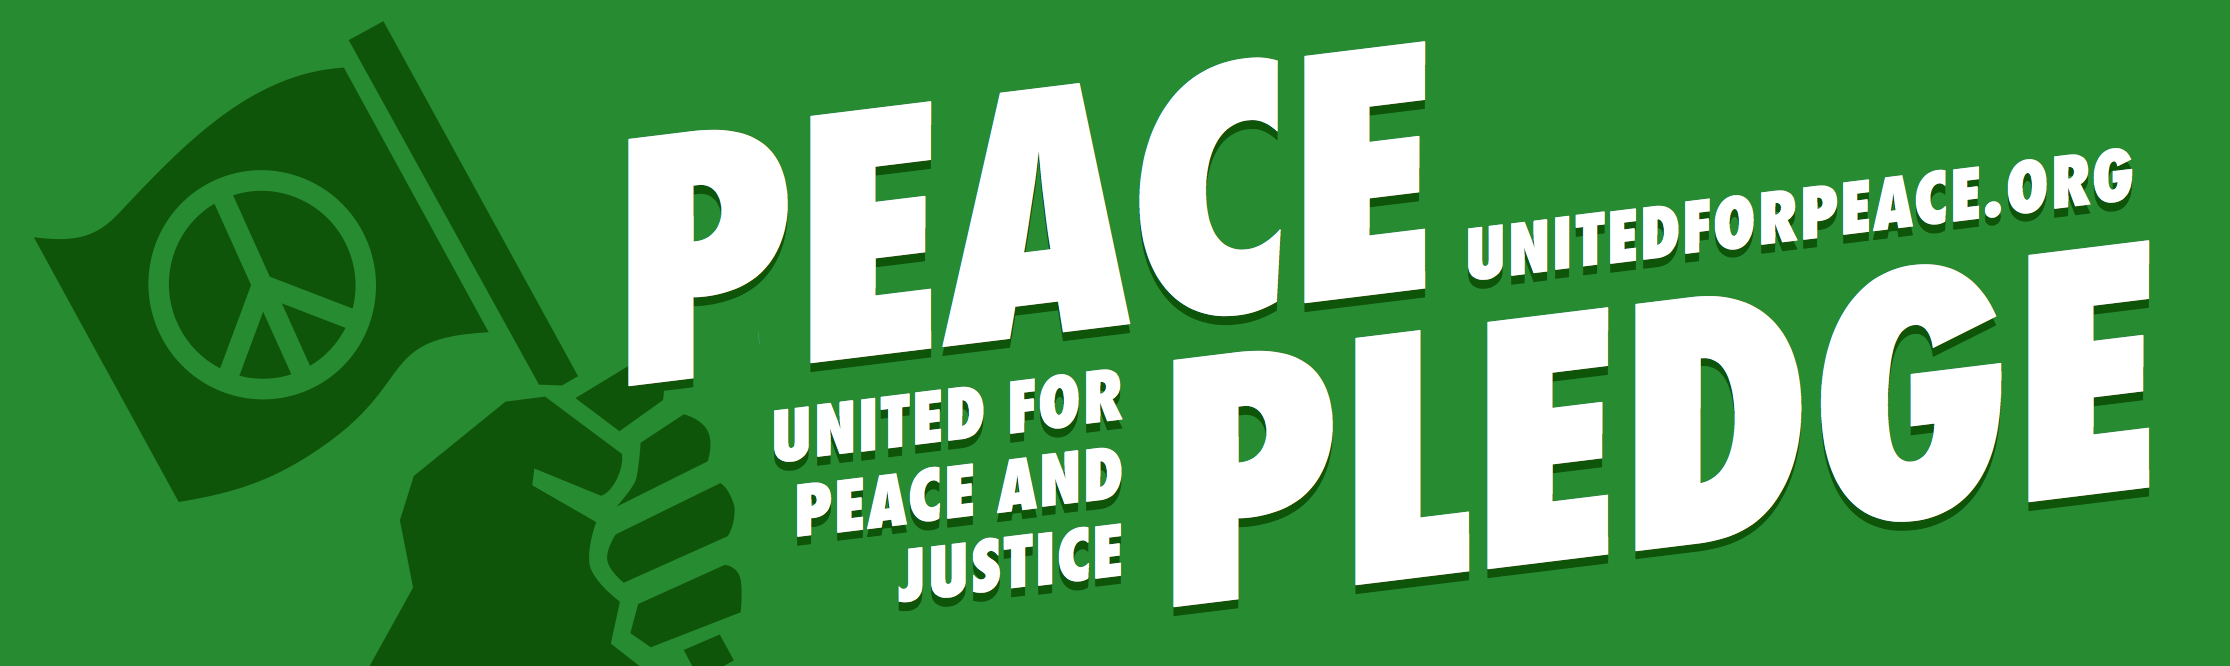 Have Your Group Endorse the Peace Pledge